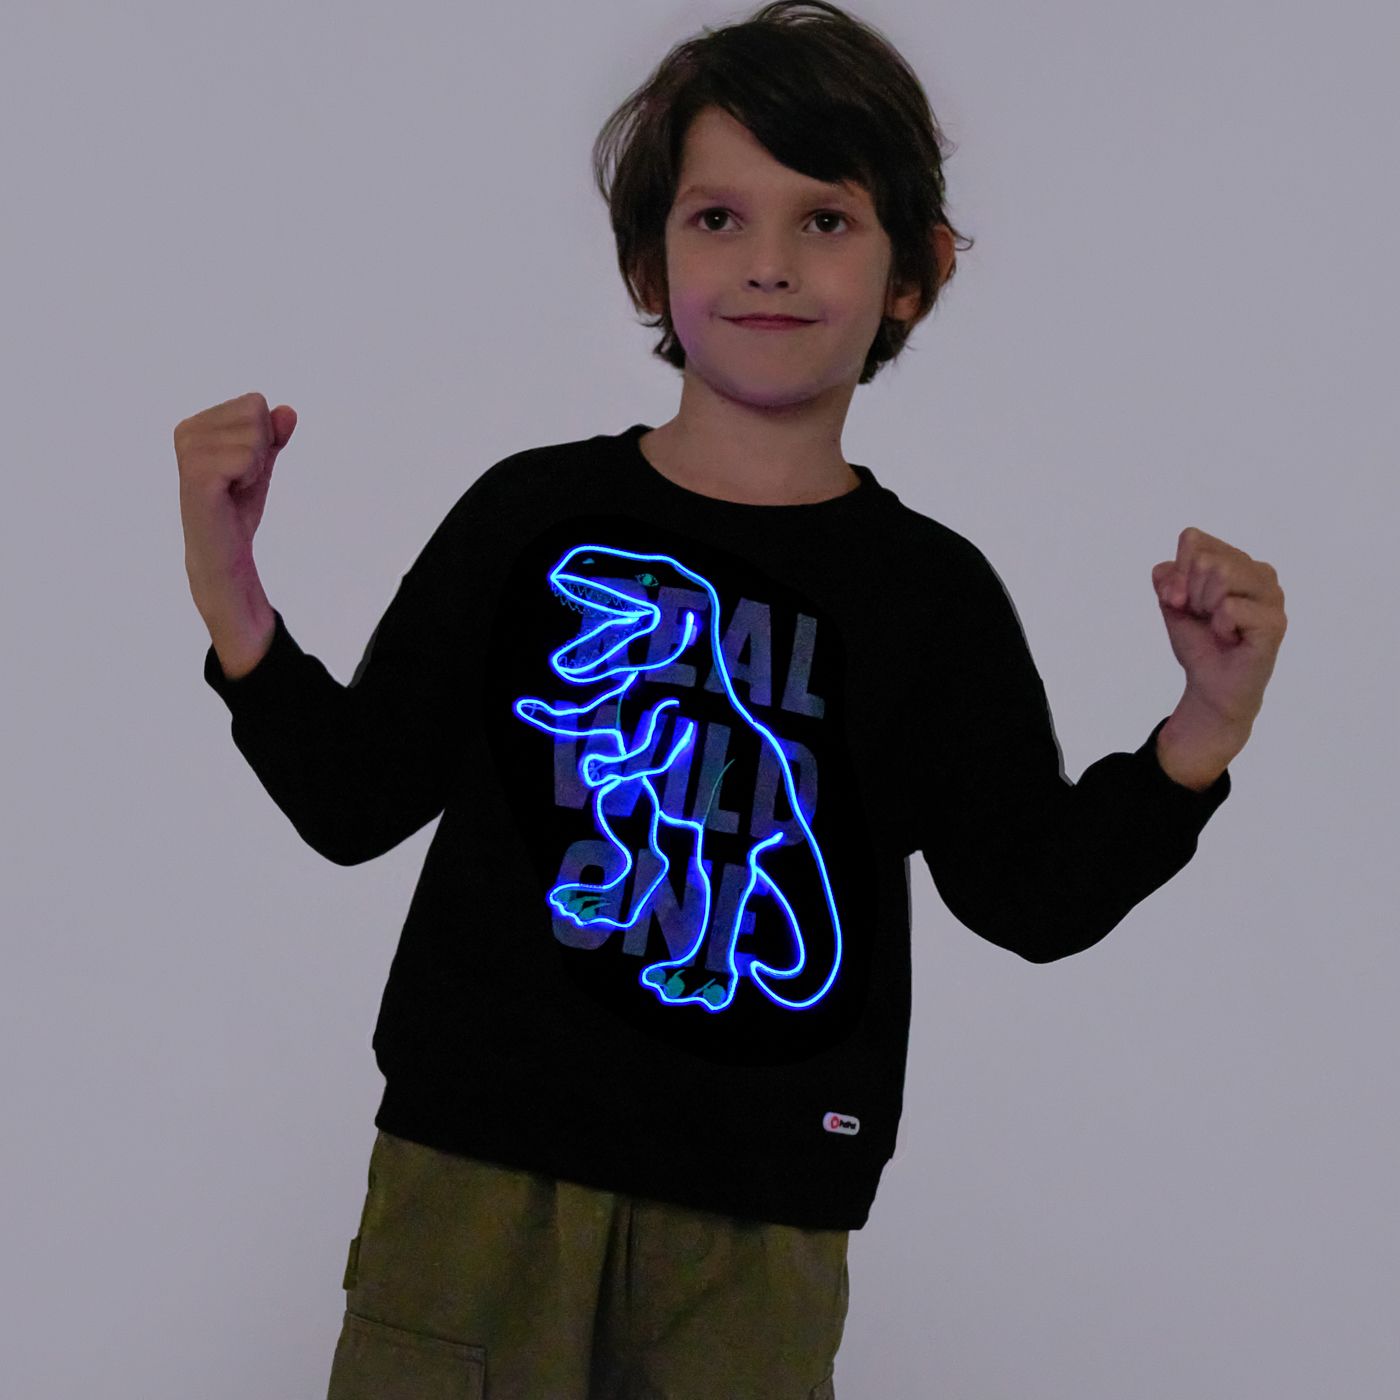 Go-Glow Illuminating Sweatshirt With Light Up Dinosaur Pattern Including Controller (Built-In Battery)